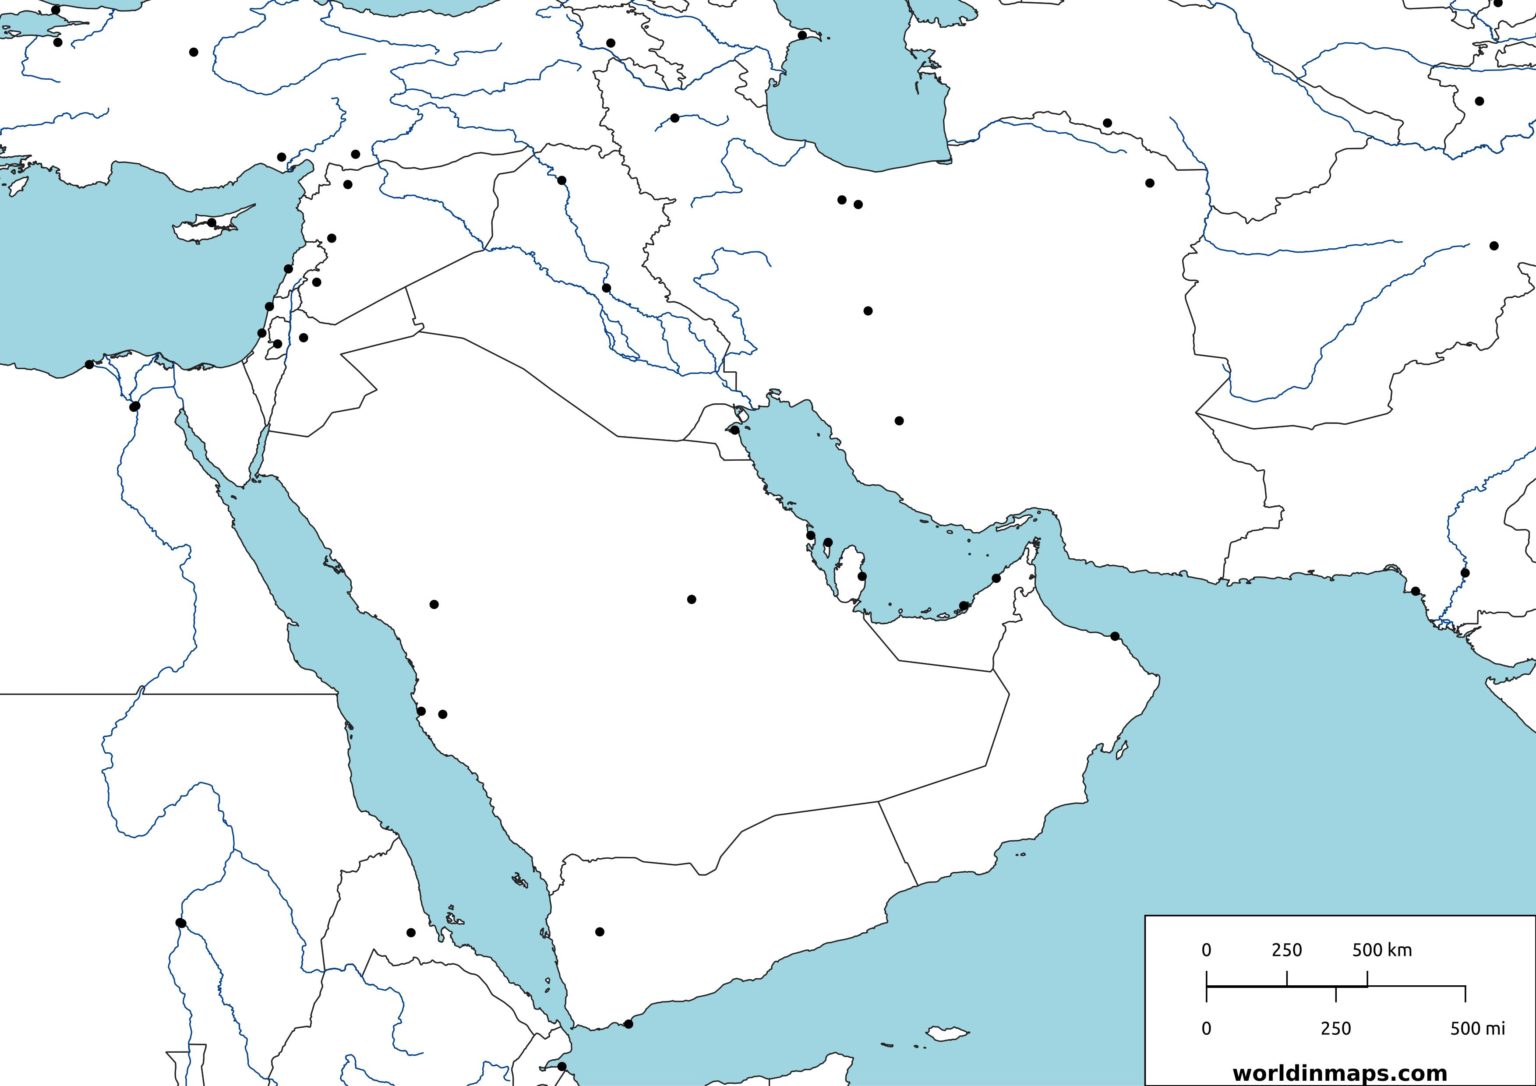 Middle East - World in maps